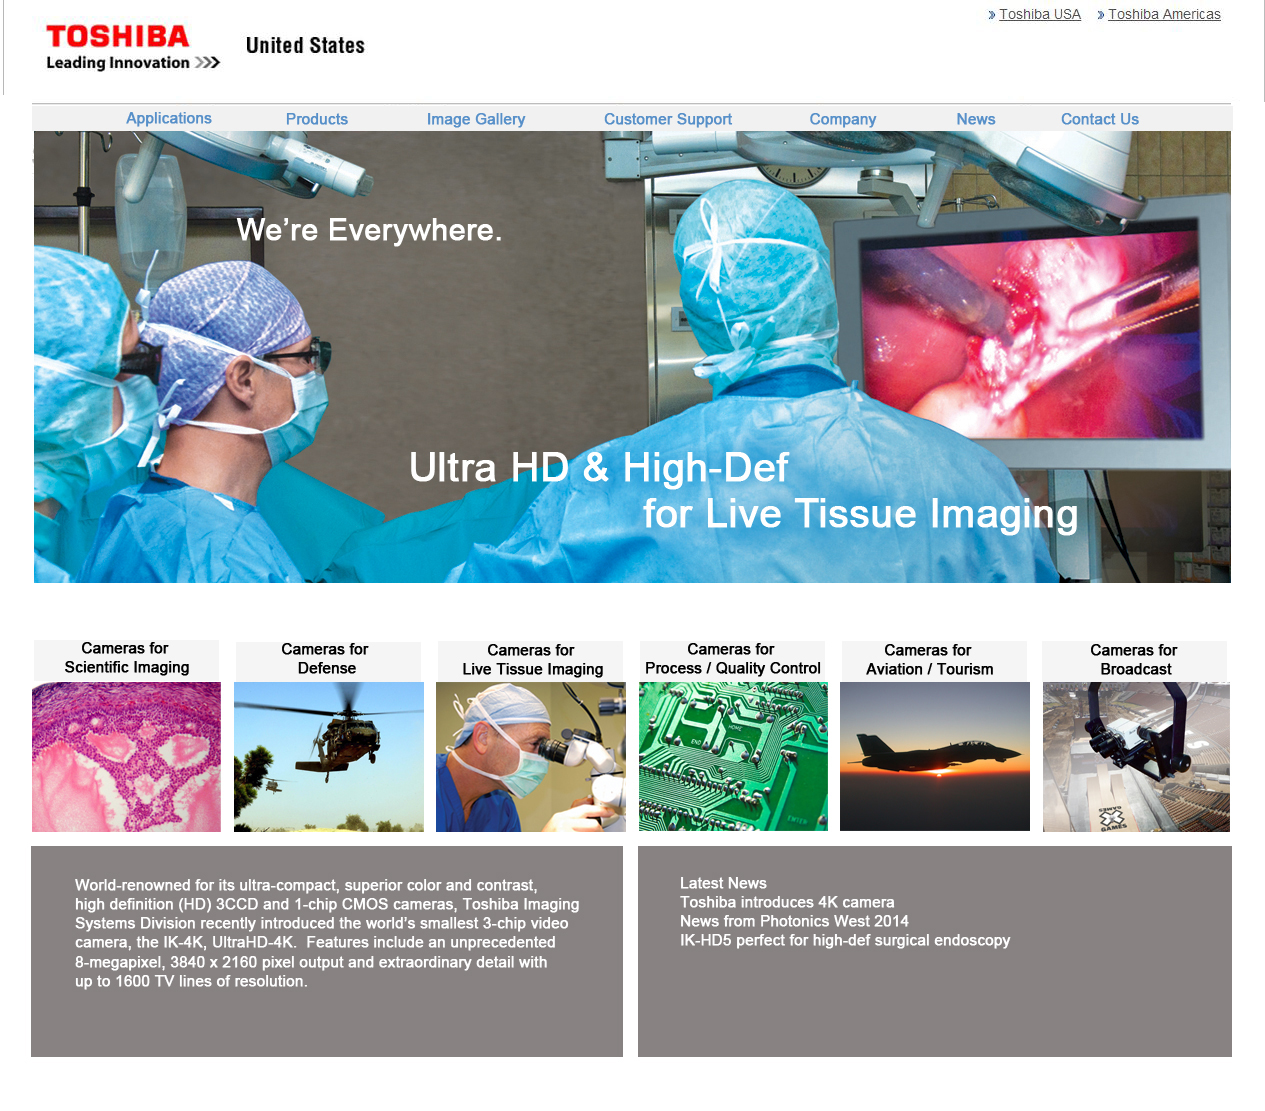 Toshiba Imaging Systems